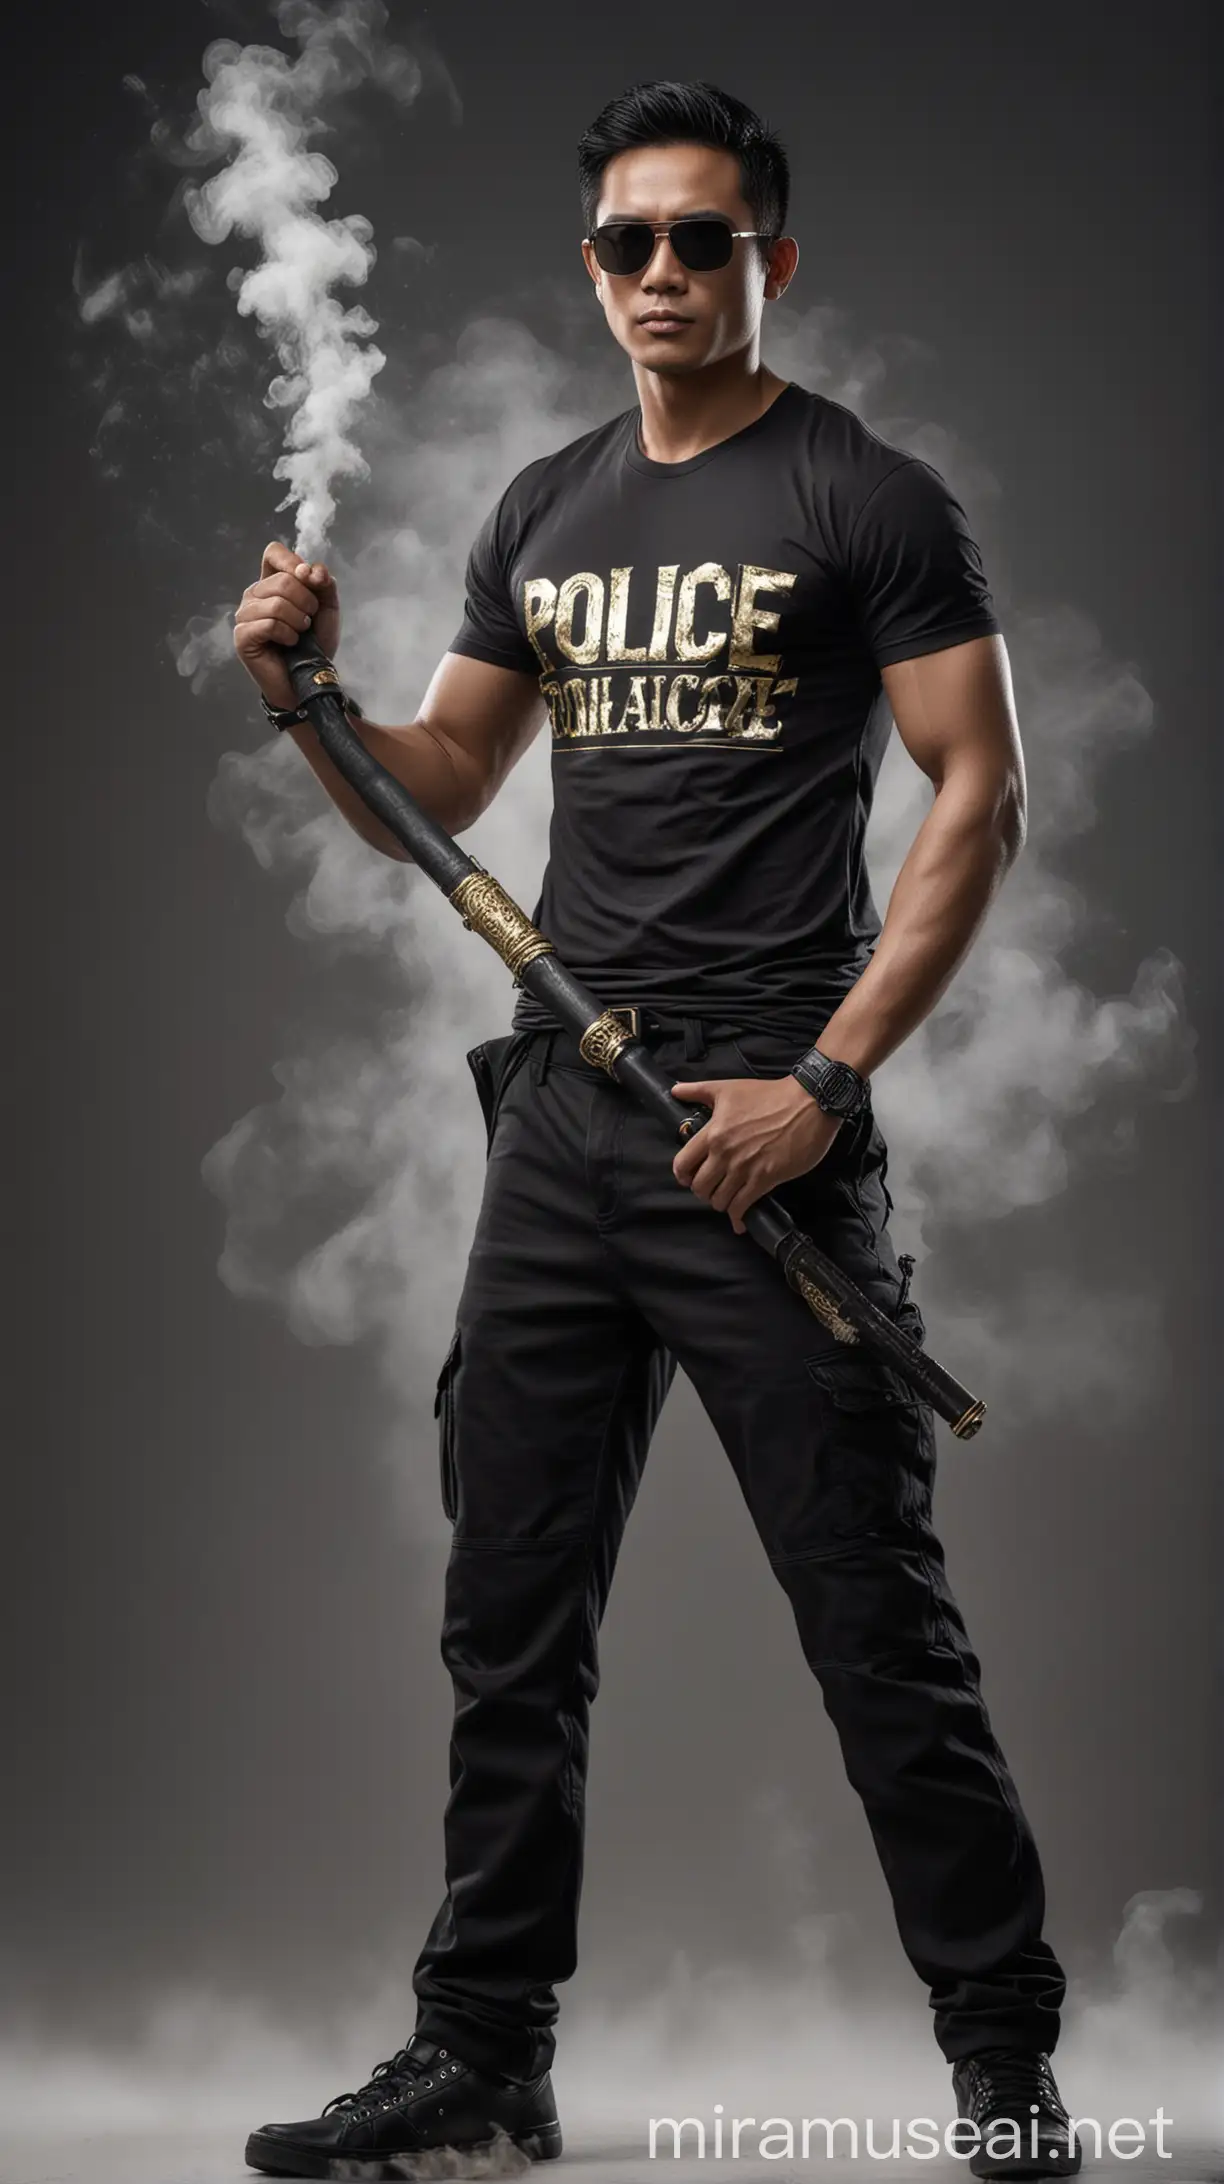 ULTRA REALISTIC high definition, Handsome Indonesian man in a black t-shirt that says "police" posing holding an Iron Baton, facing the camera, wearing sunglasses, with Black hair, wearing black tactical pants, wearing tactical shoes, in thick white smoke with gold highlights